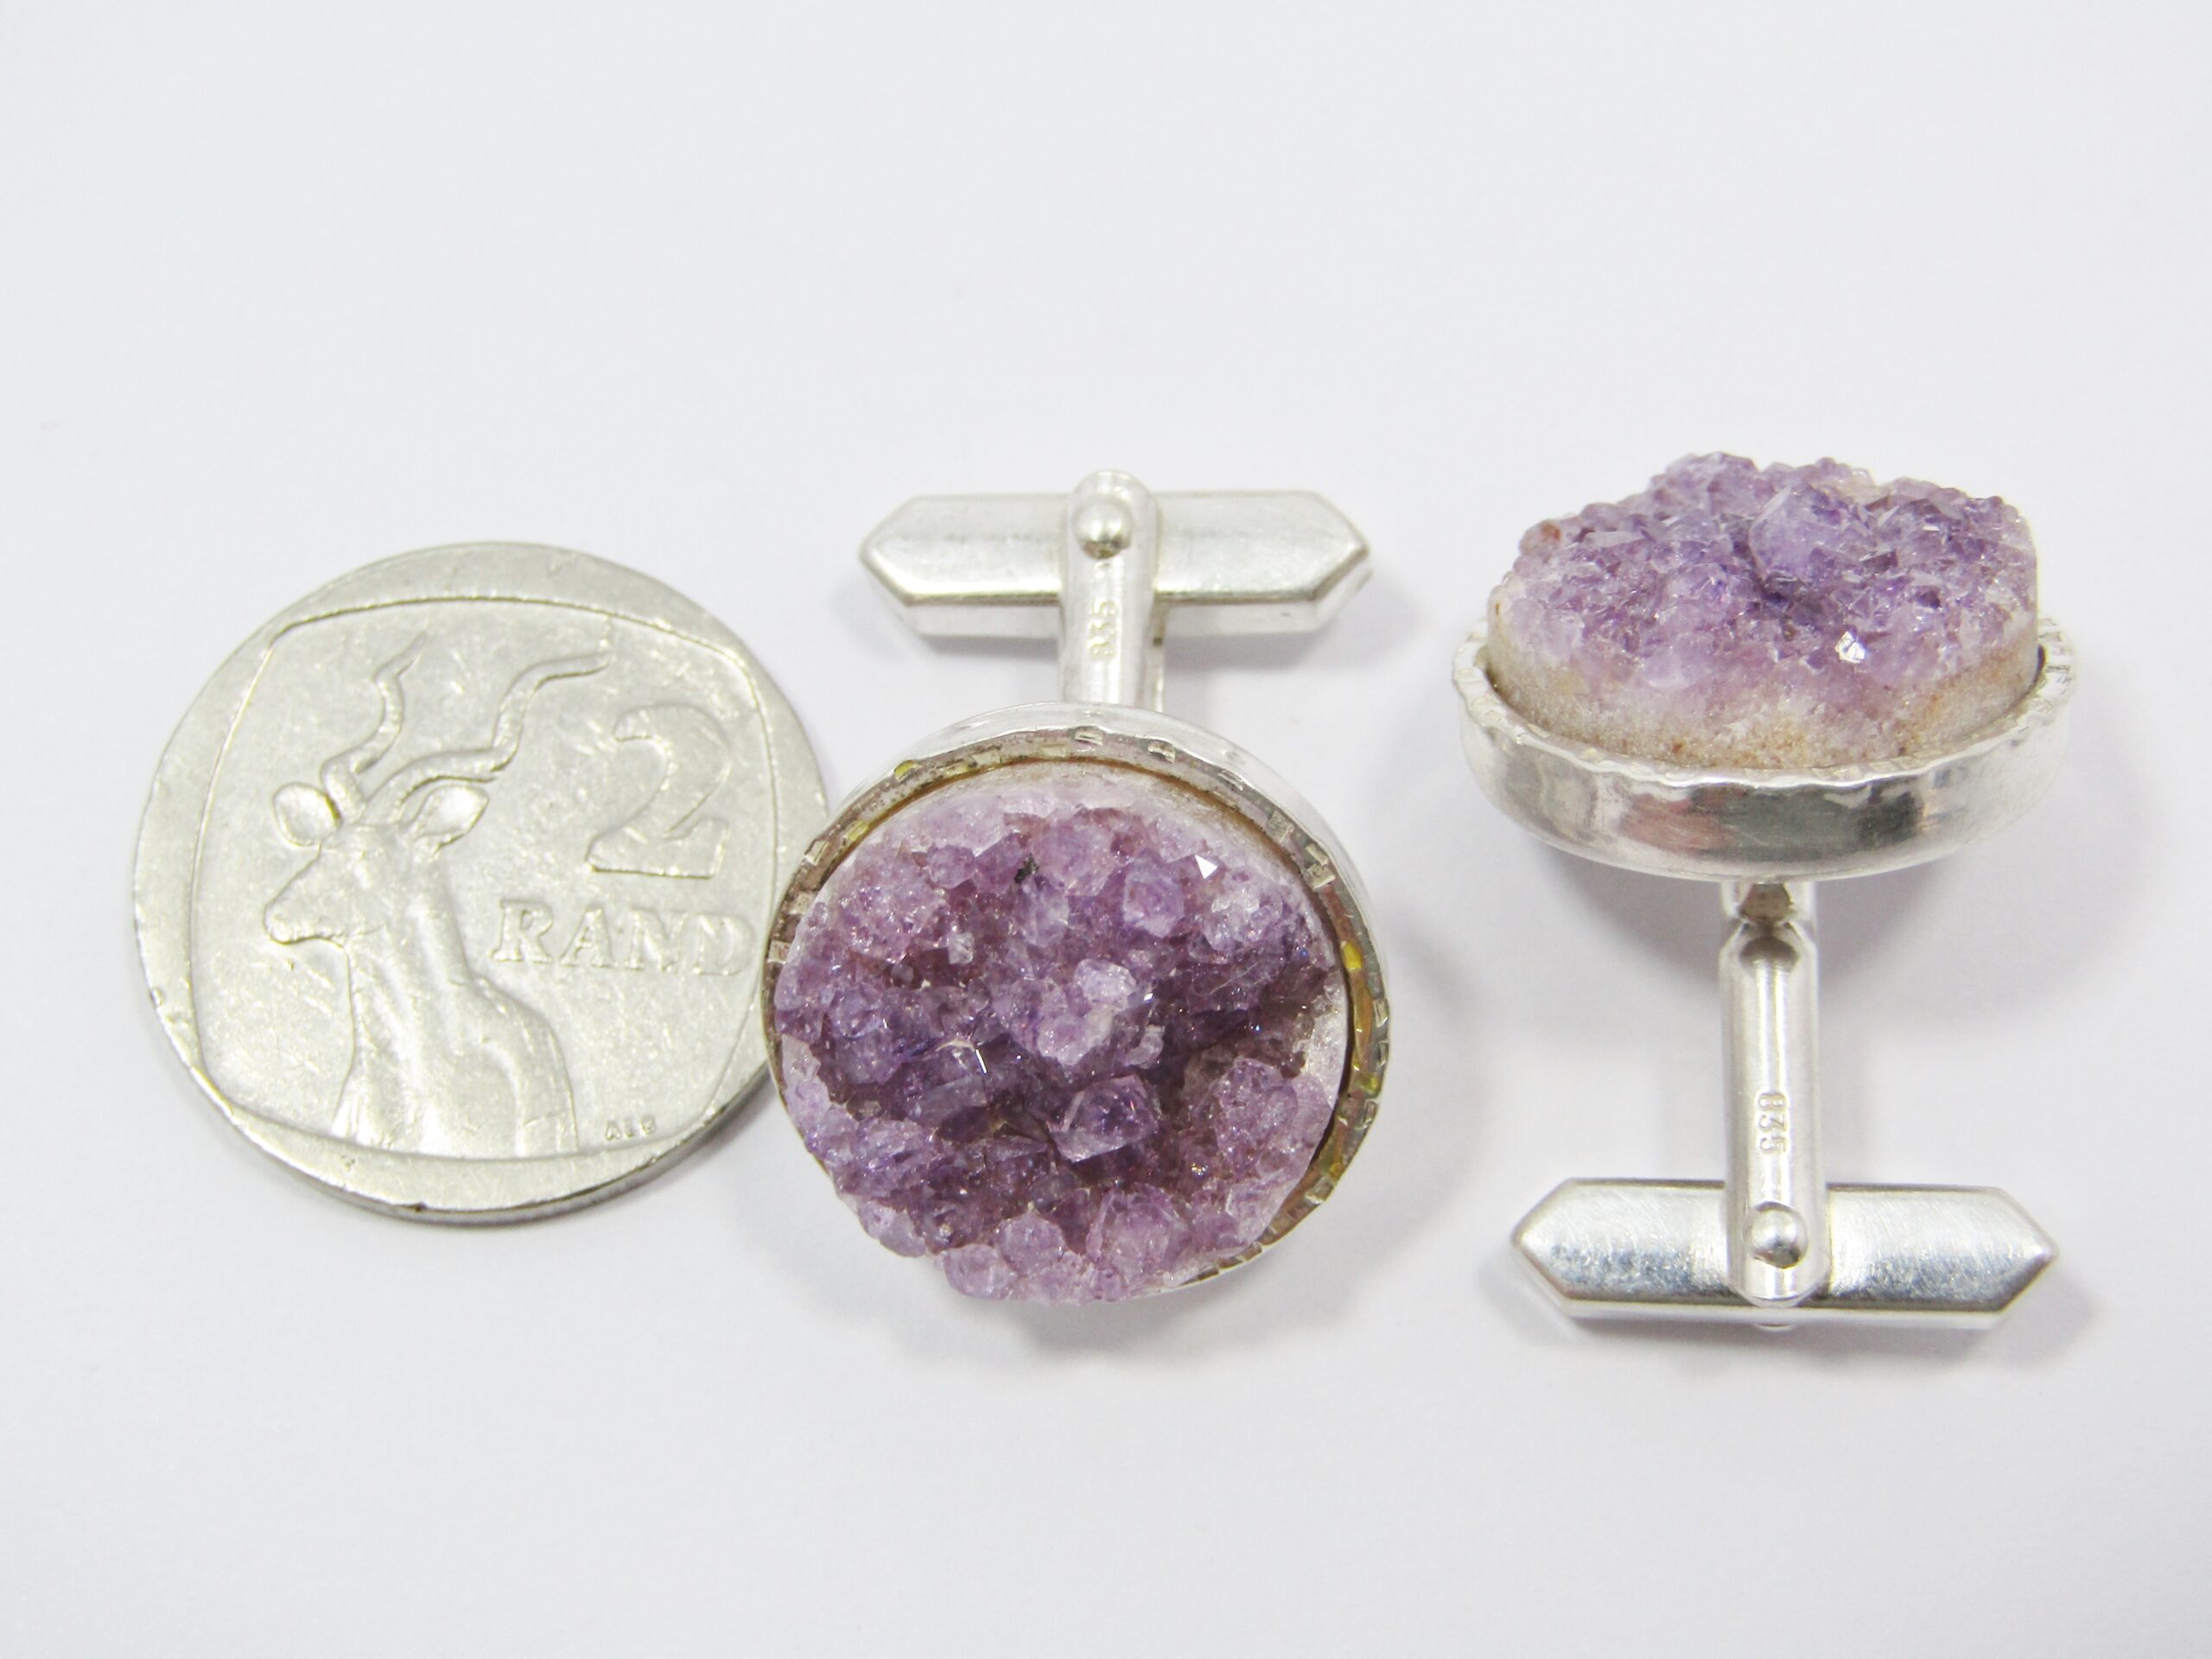 A Stunning Pair of Rock Crystal Cuff Links in Sterling Silver.